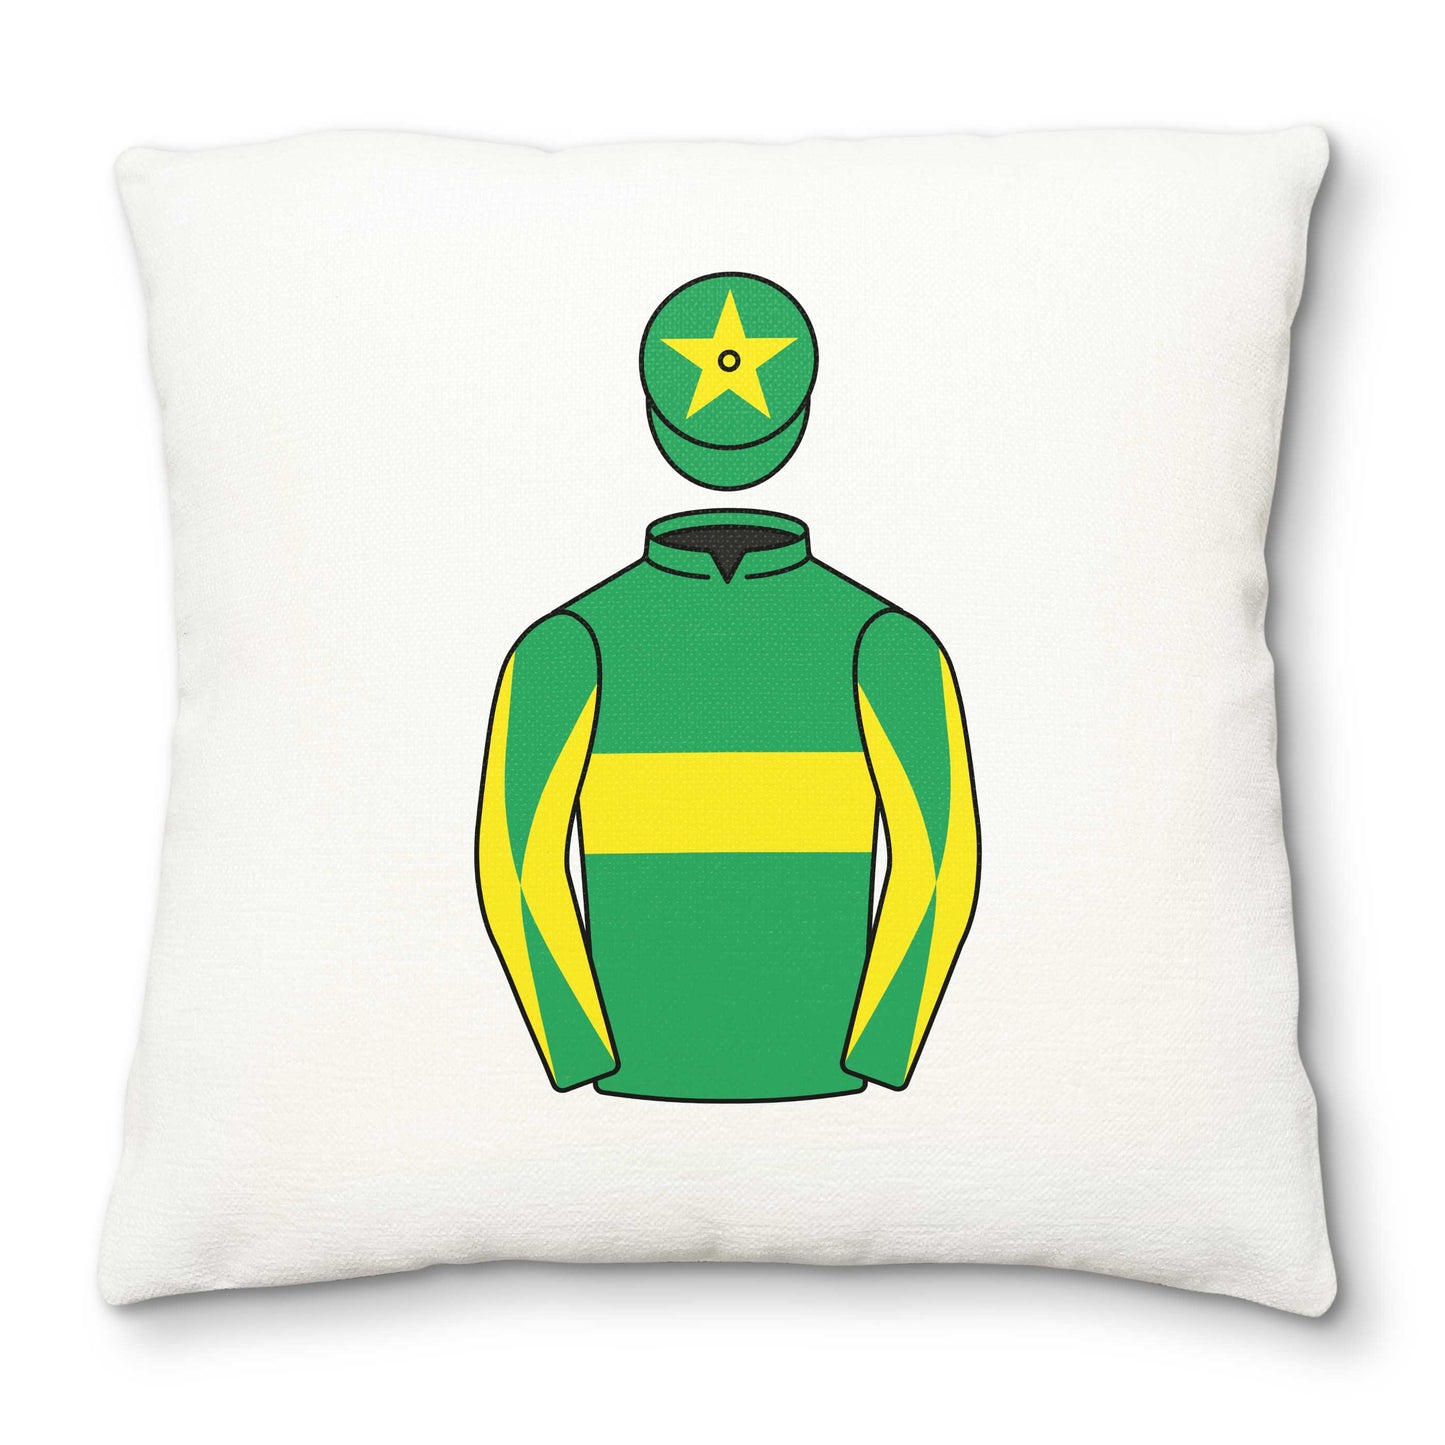 Wessex Racing Club Deluxe Cushion Cover - Hacked Up